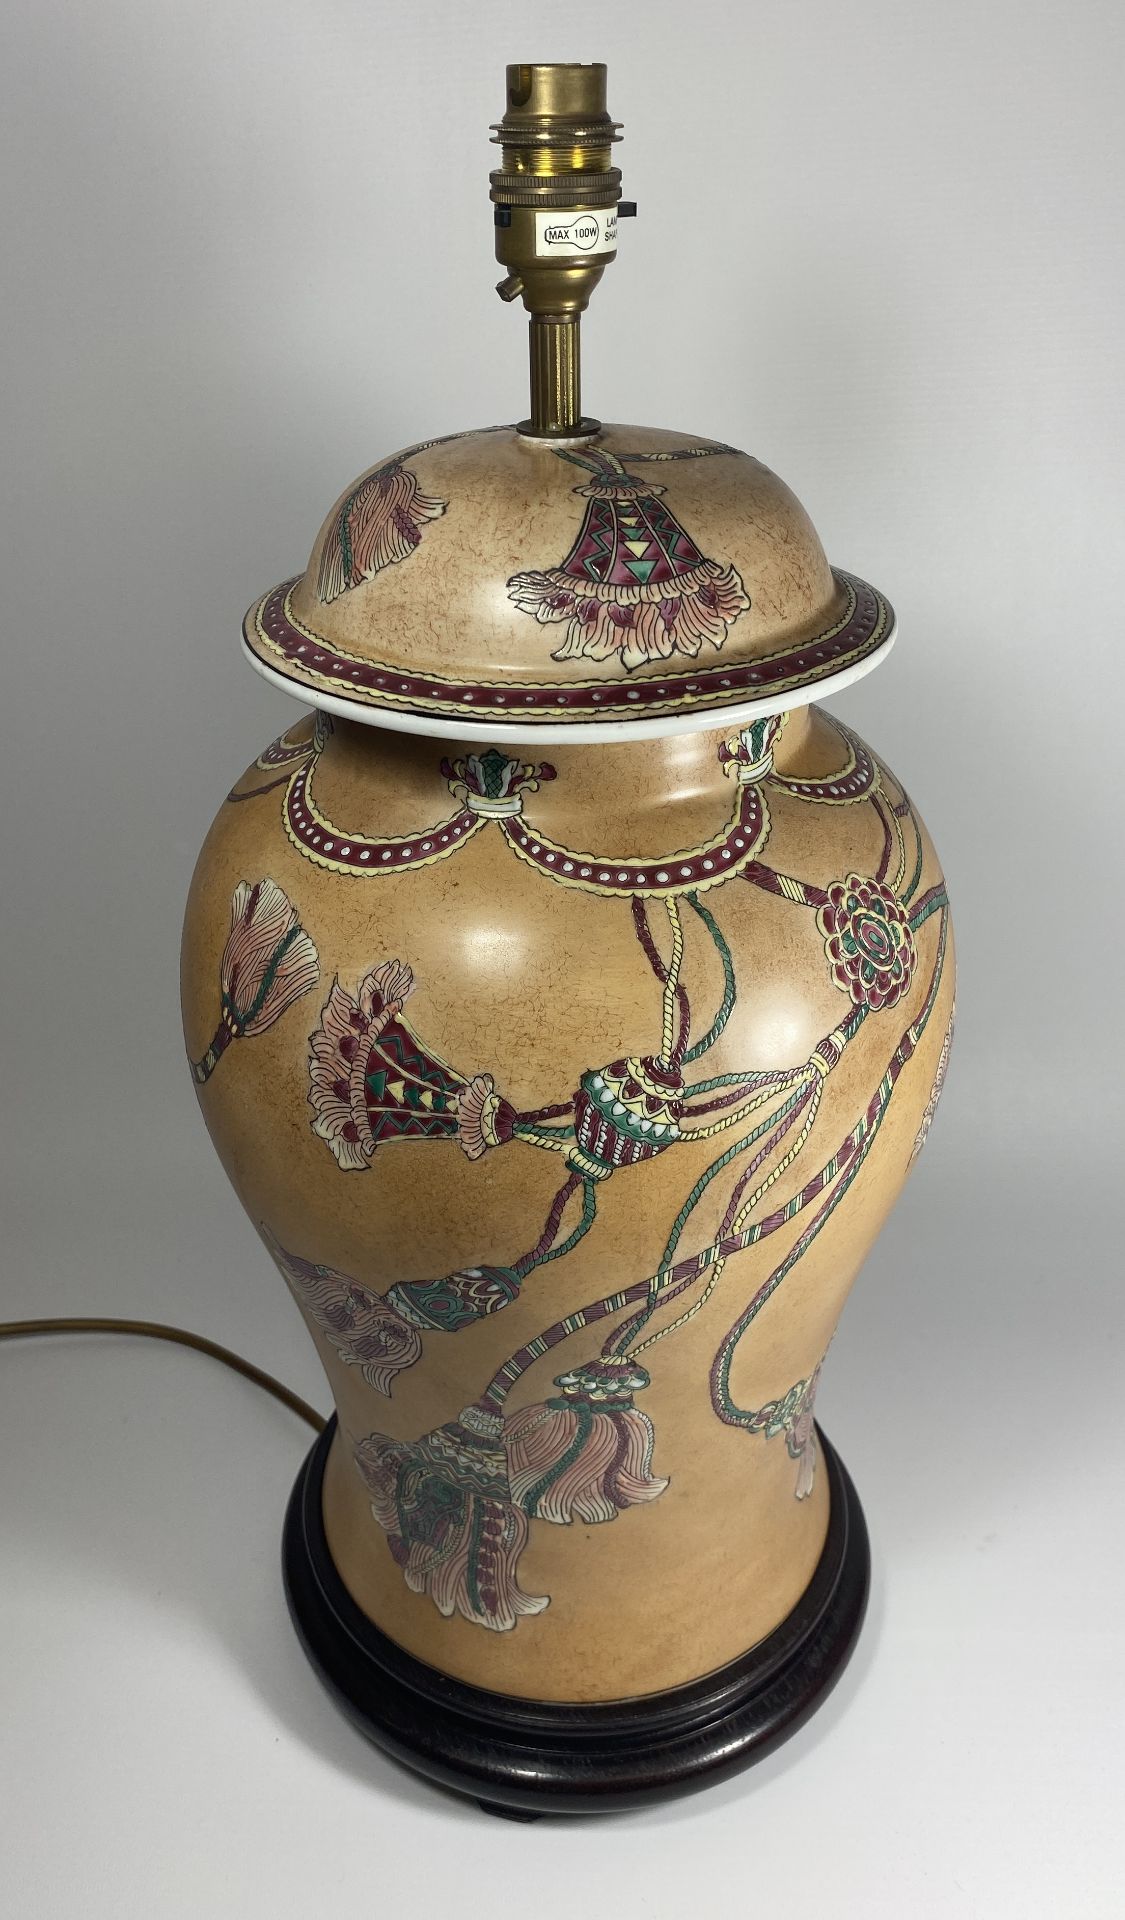 A LARGE ORIENTAL POTTERY TABLE LAMP WITH FLORAL DESIGN ON WOODEN BASE, HEIGHT APPROX 54CM